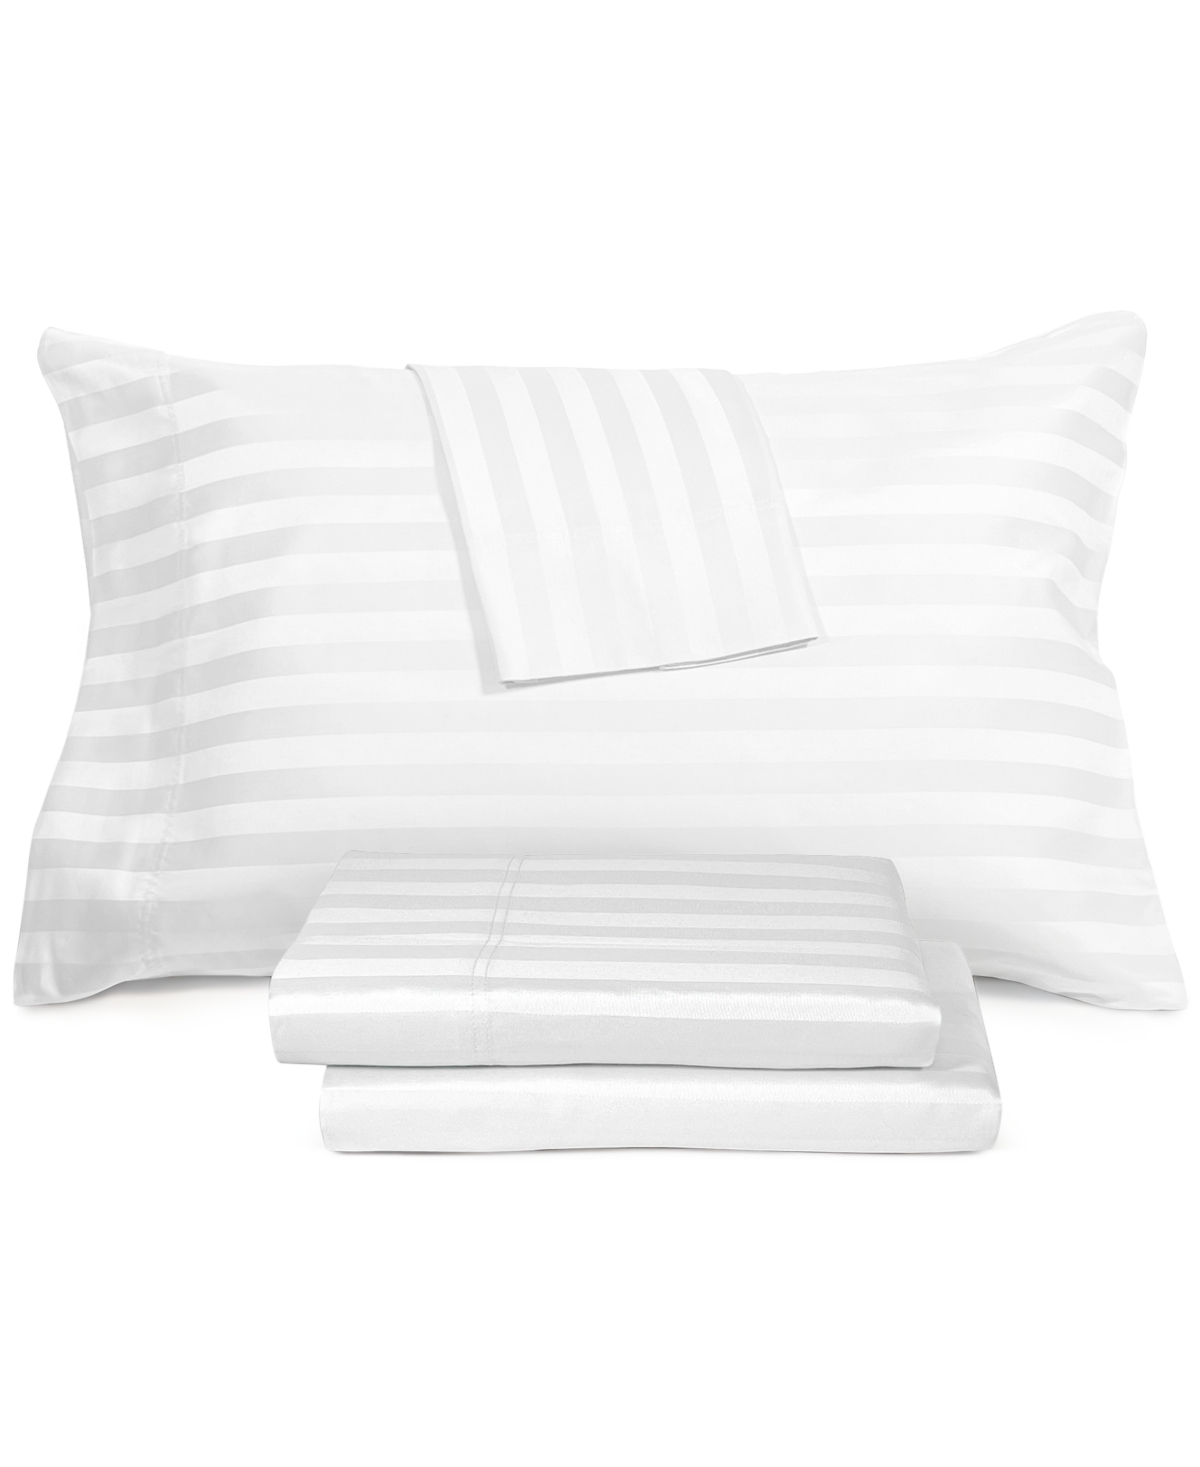 Aq Textiles Ultra Lux Wide Stripe 1200-Thread Count 4-Pc. Sheet Set, King Bedding